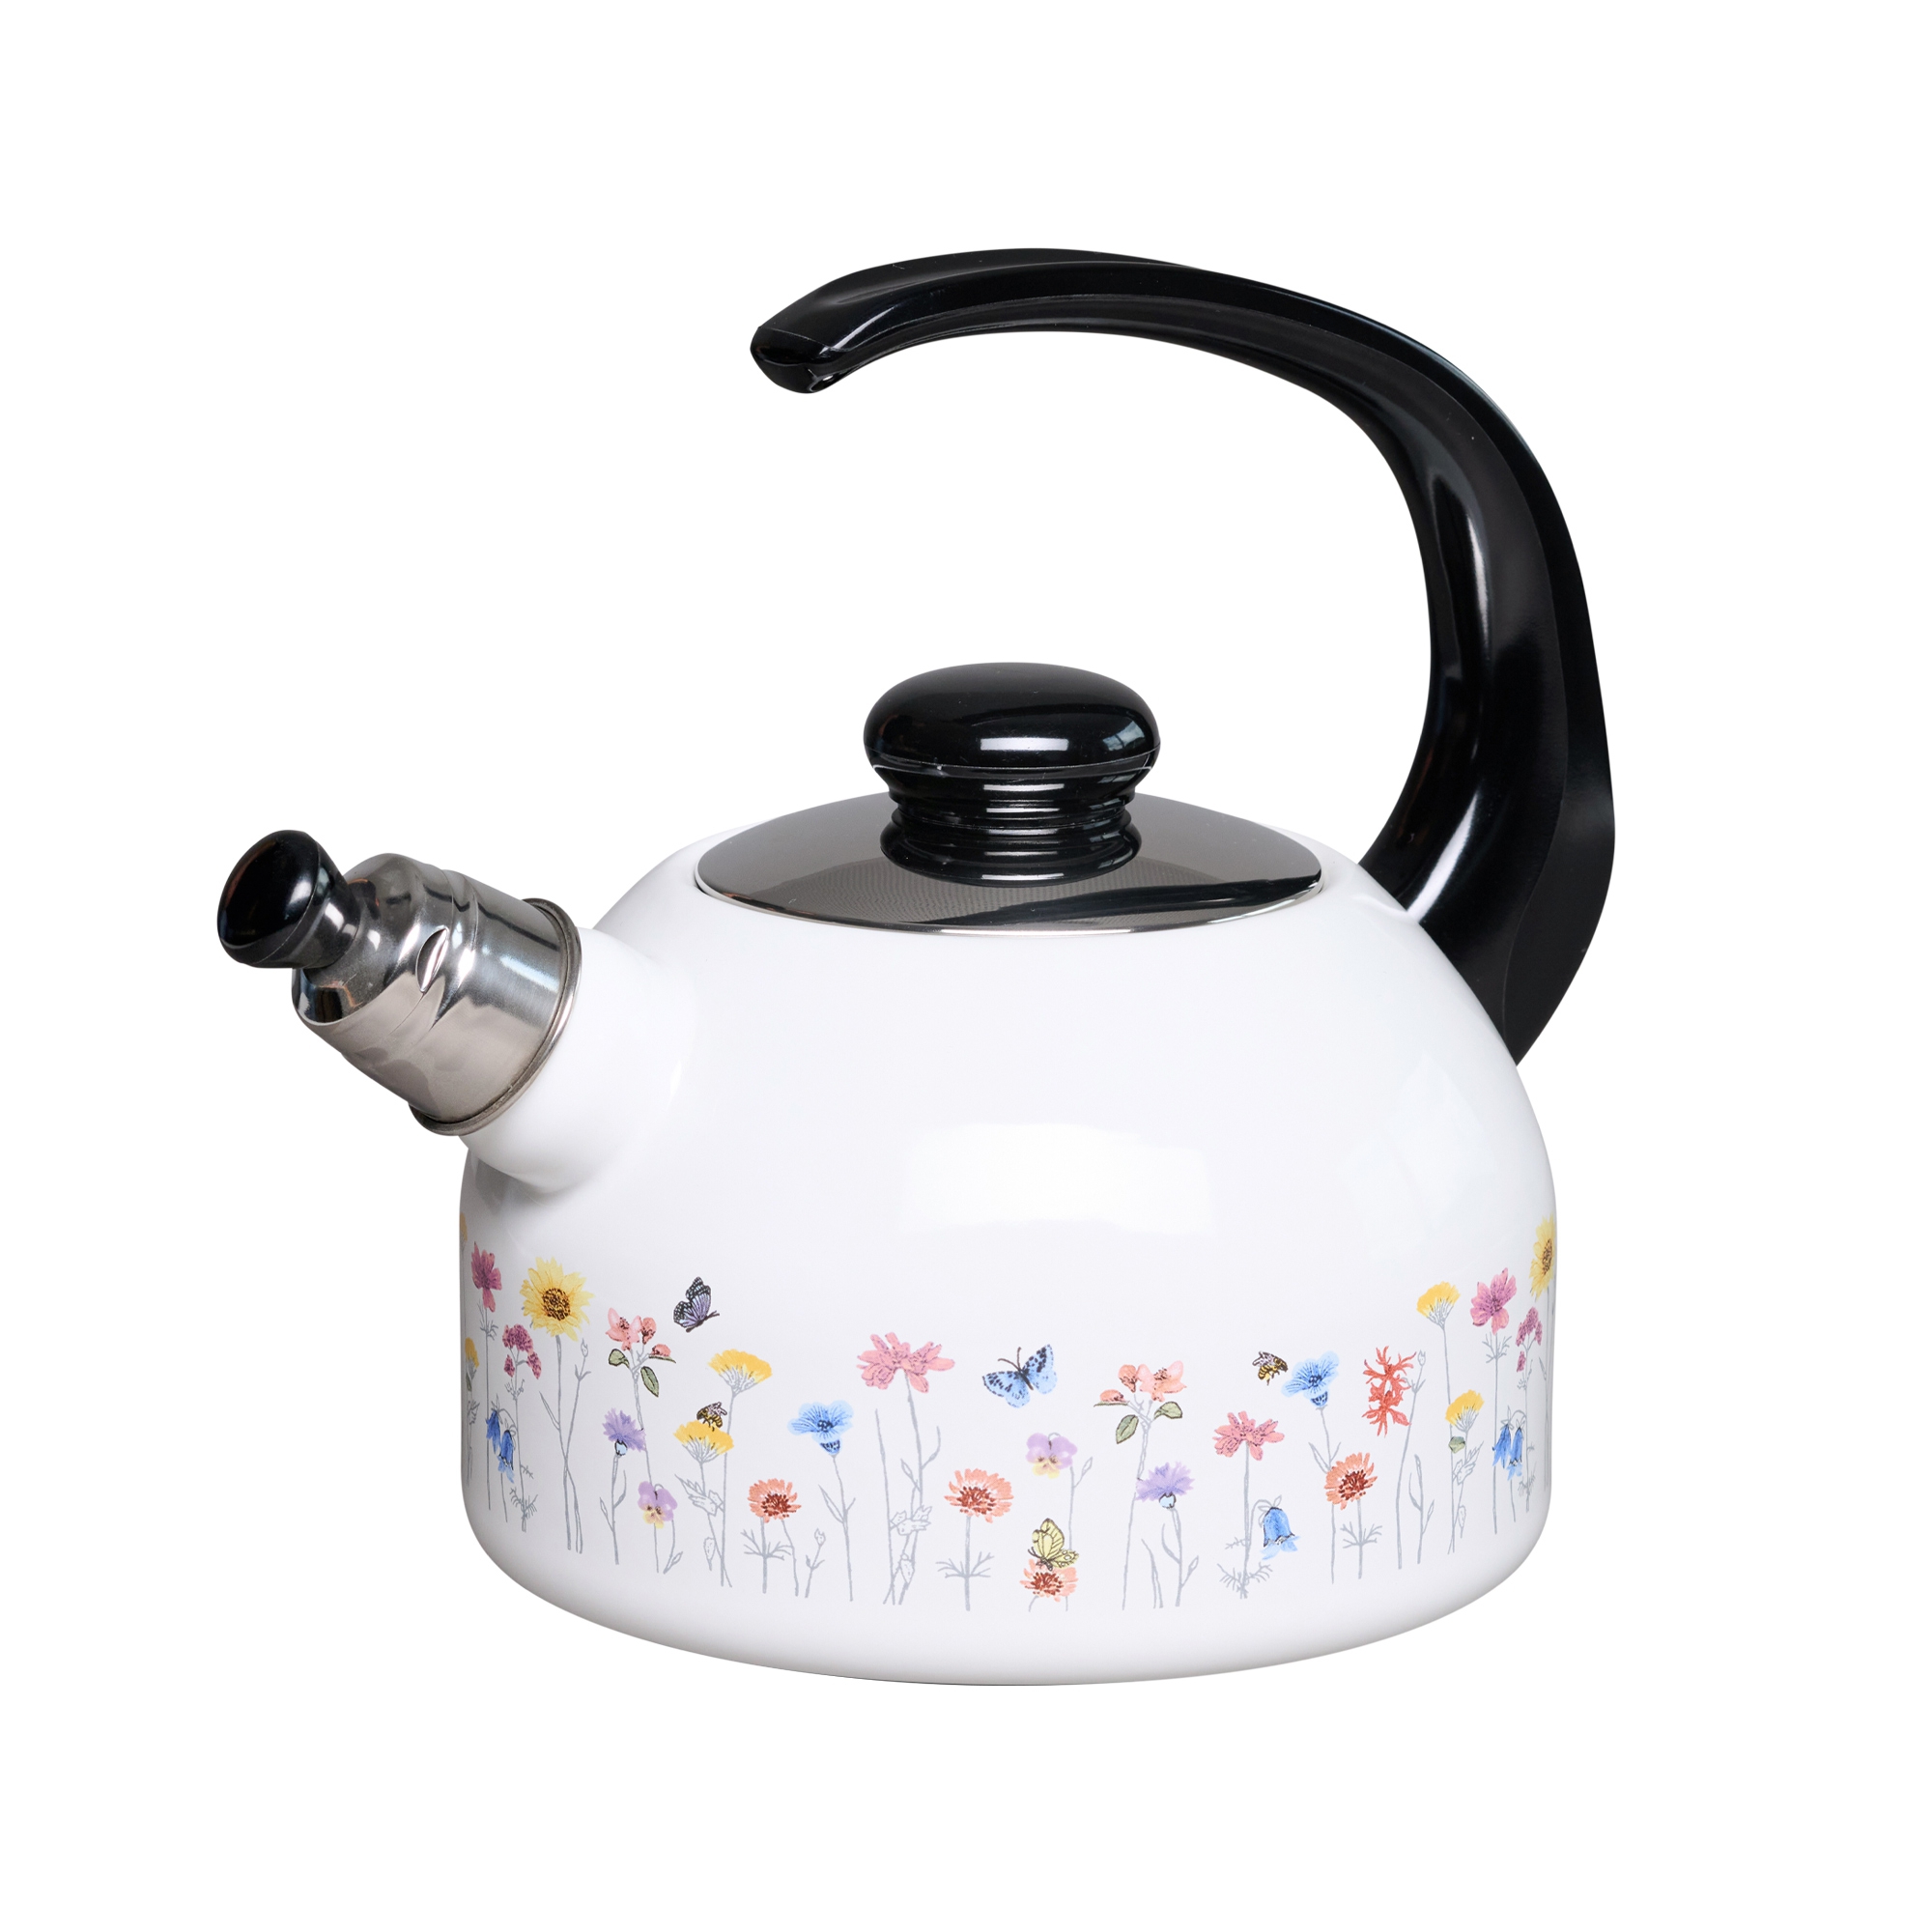 Riess special decor - FLORA - kettle with flute